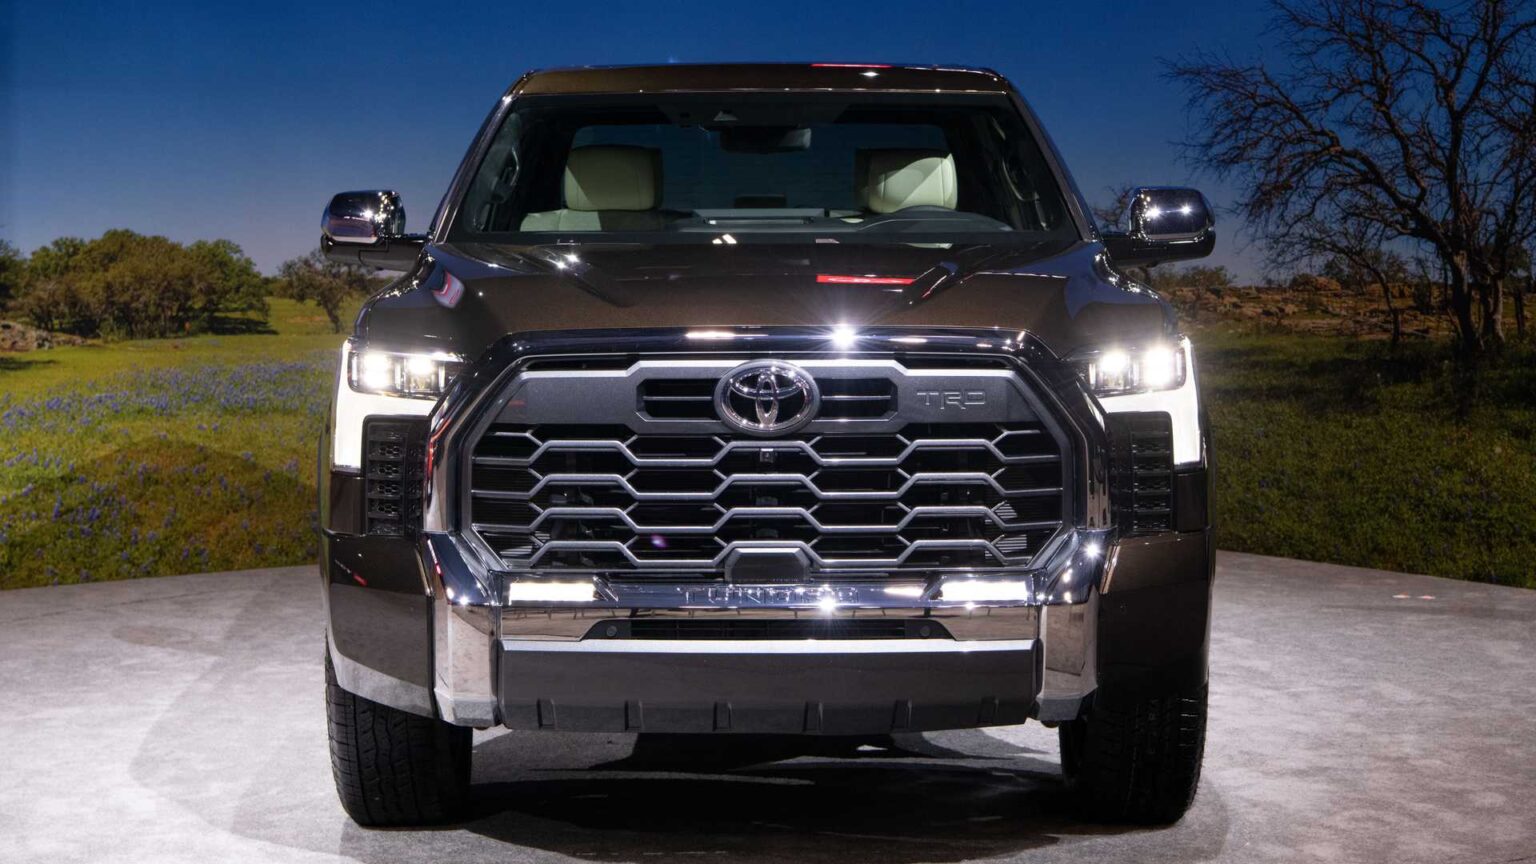 2022-toyota-tundra-1794-edition-exterior-front-view-1-1536x864.jpg